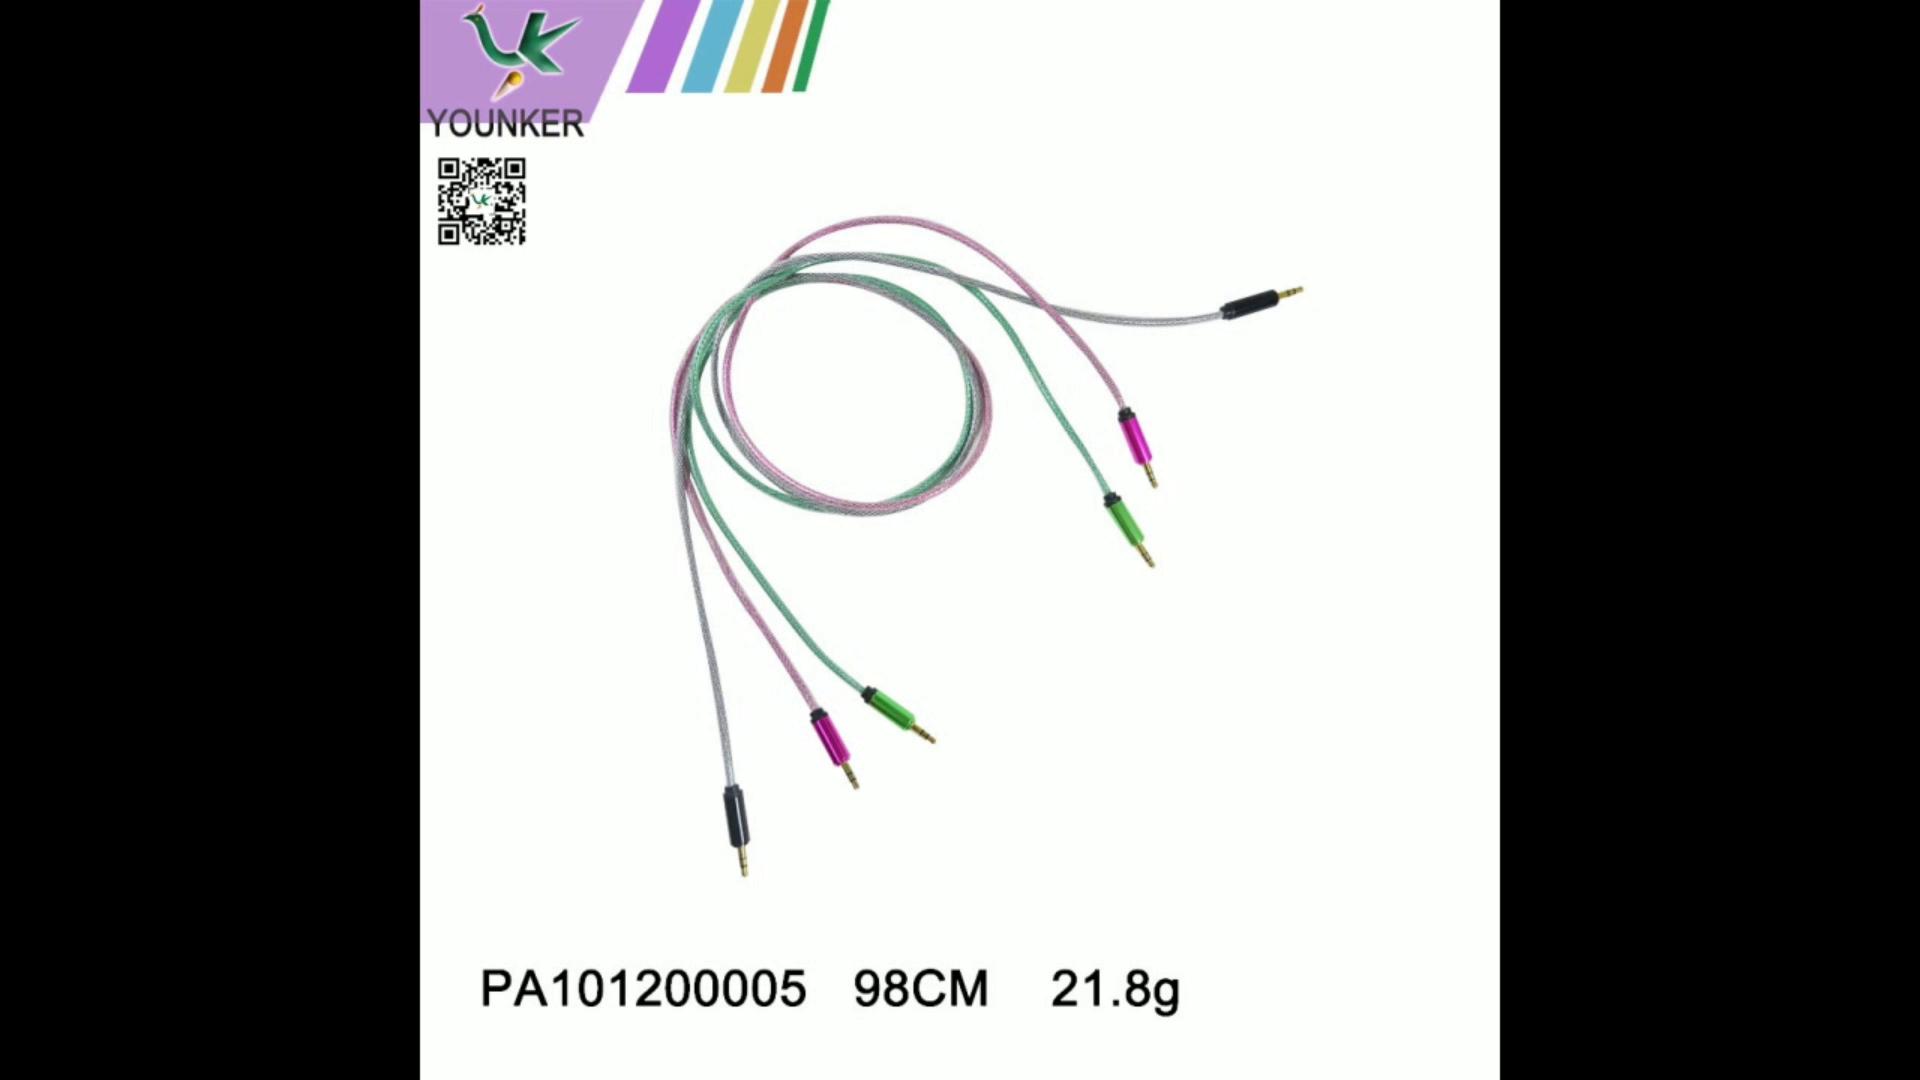 Customized OEM/ODM 98CM Audio Cable Double Jack Audio Cable Adapter.